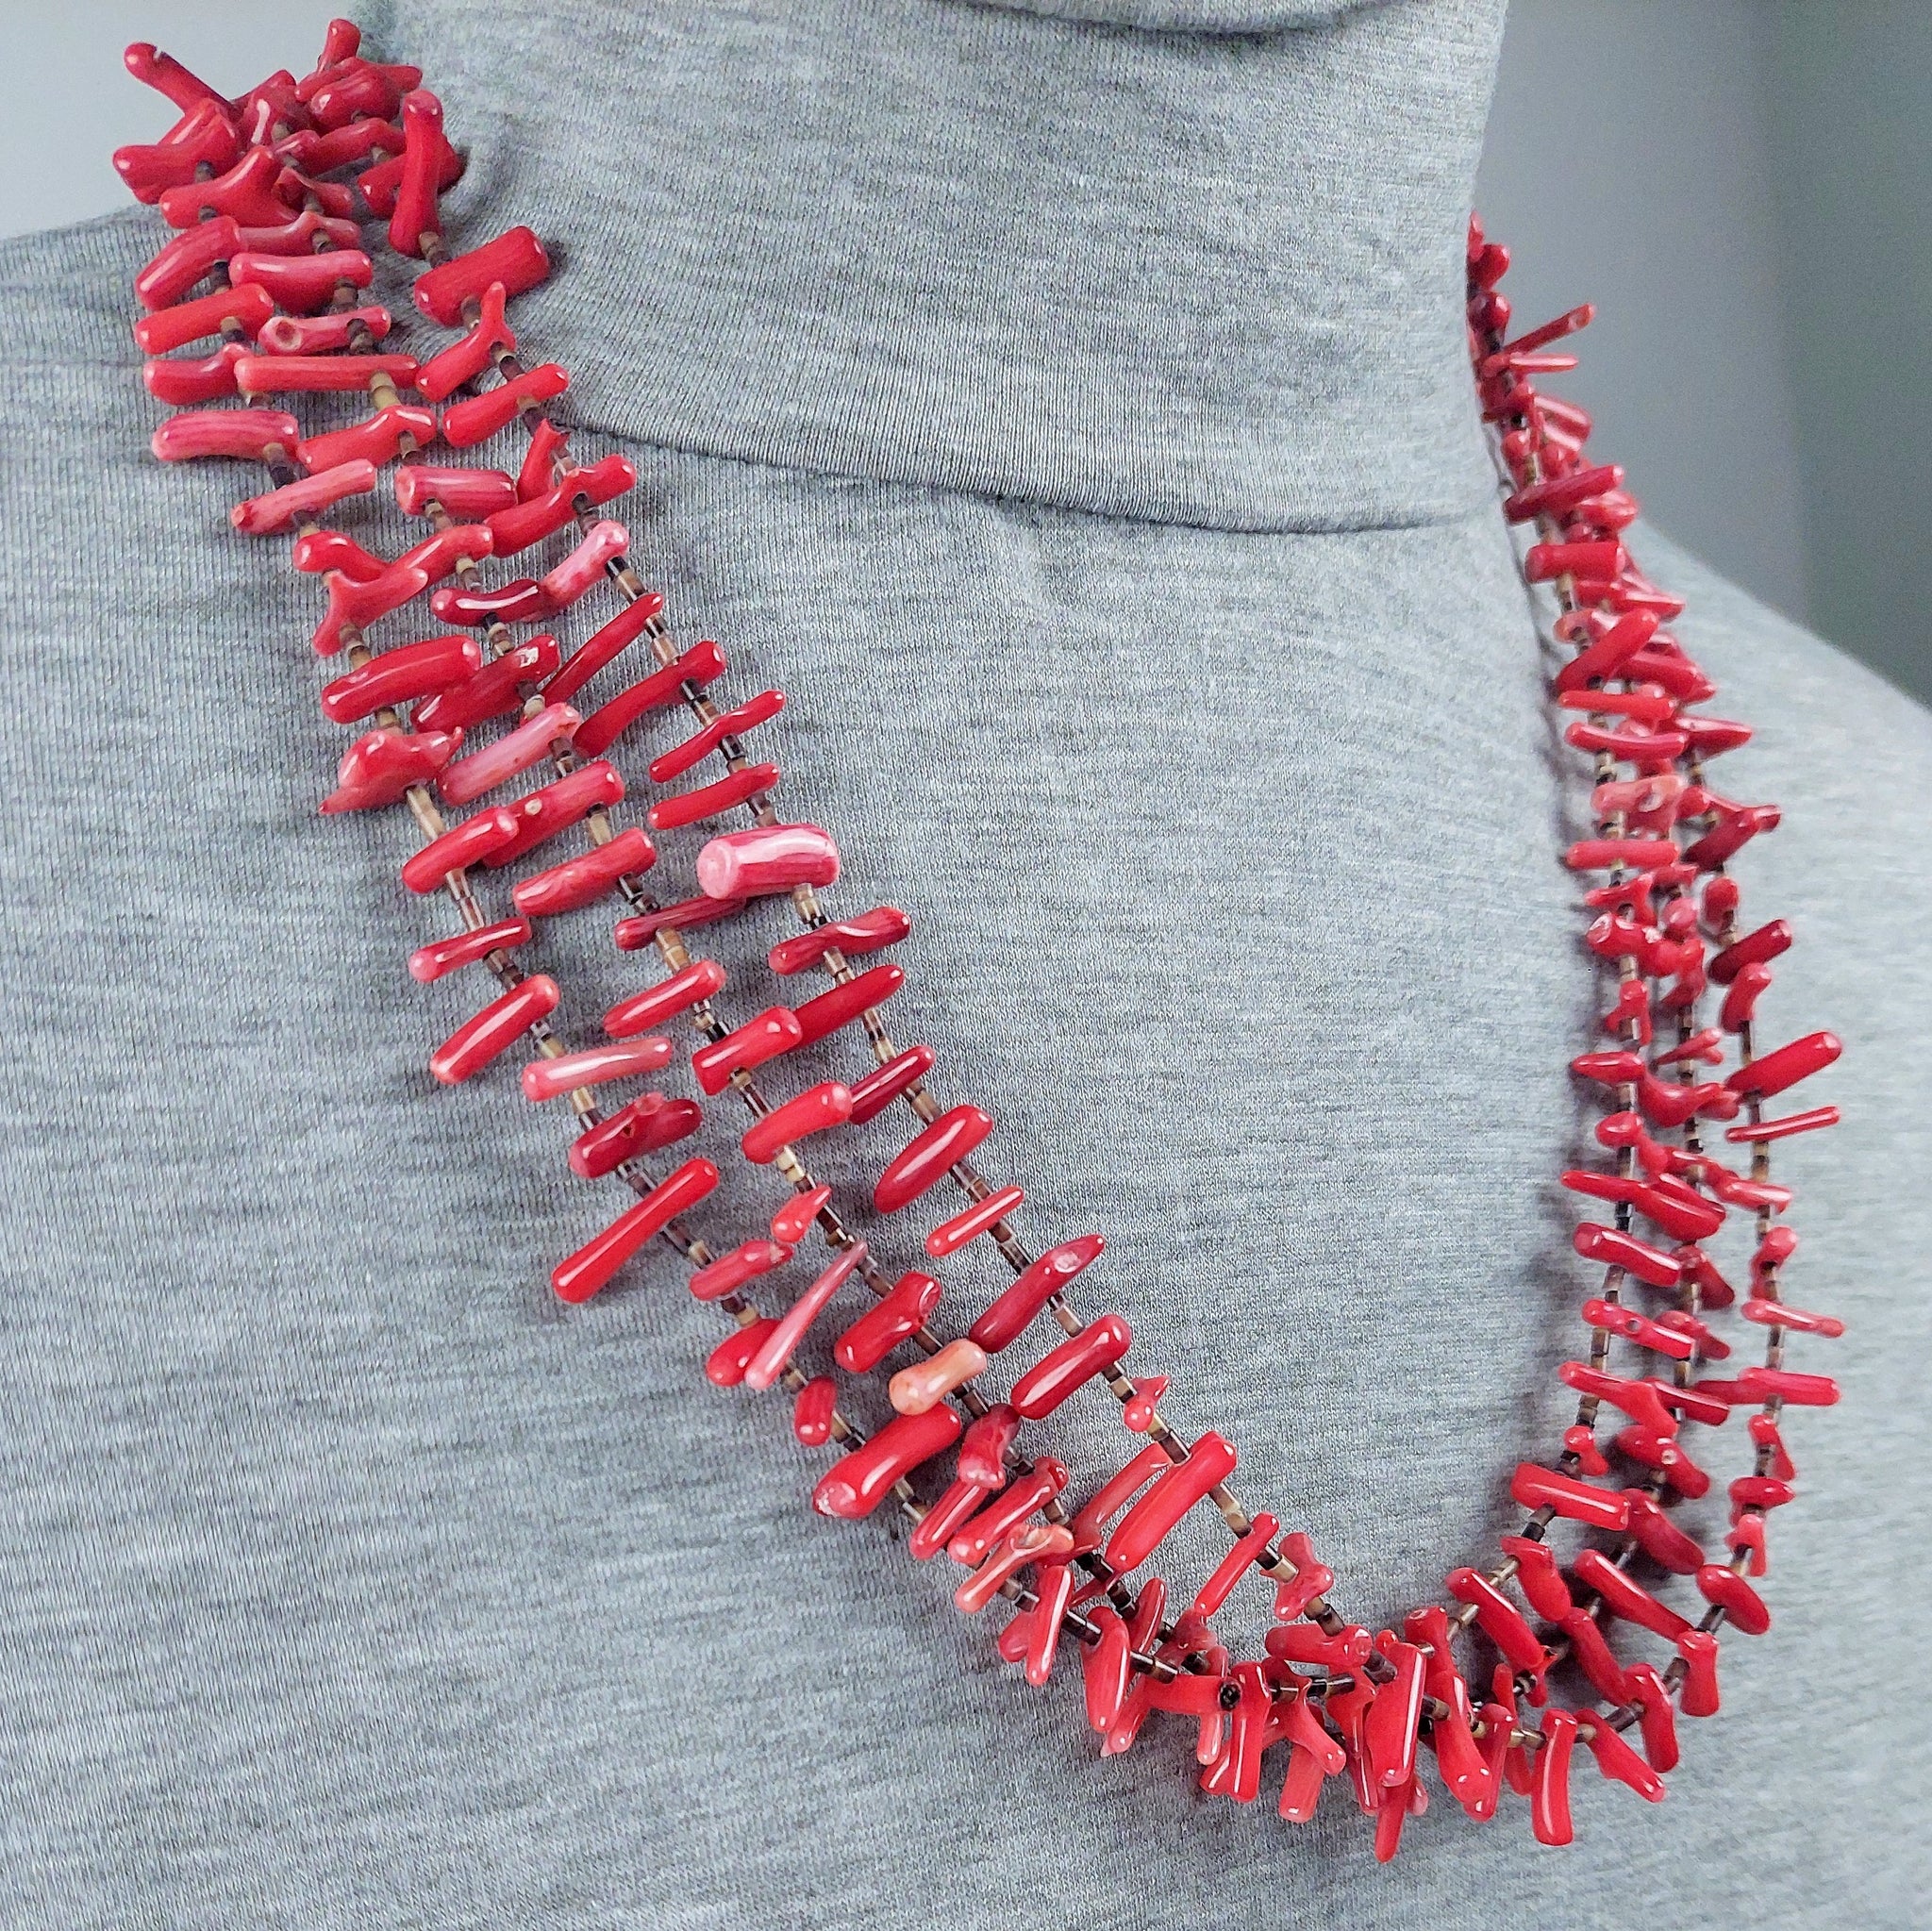 Vintage RED Coral and Heishi Bead Necklace 25" 3 Strand